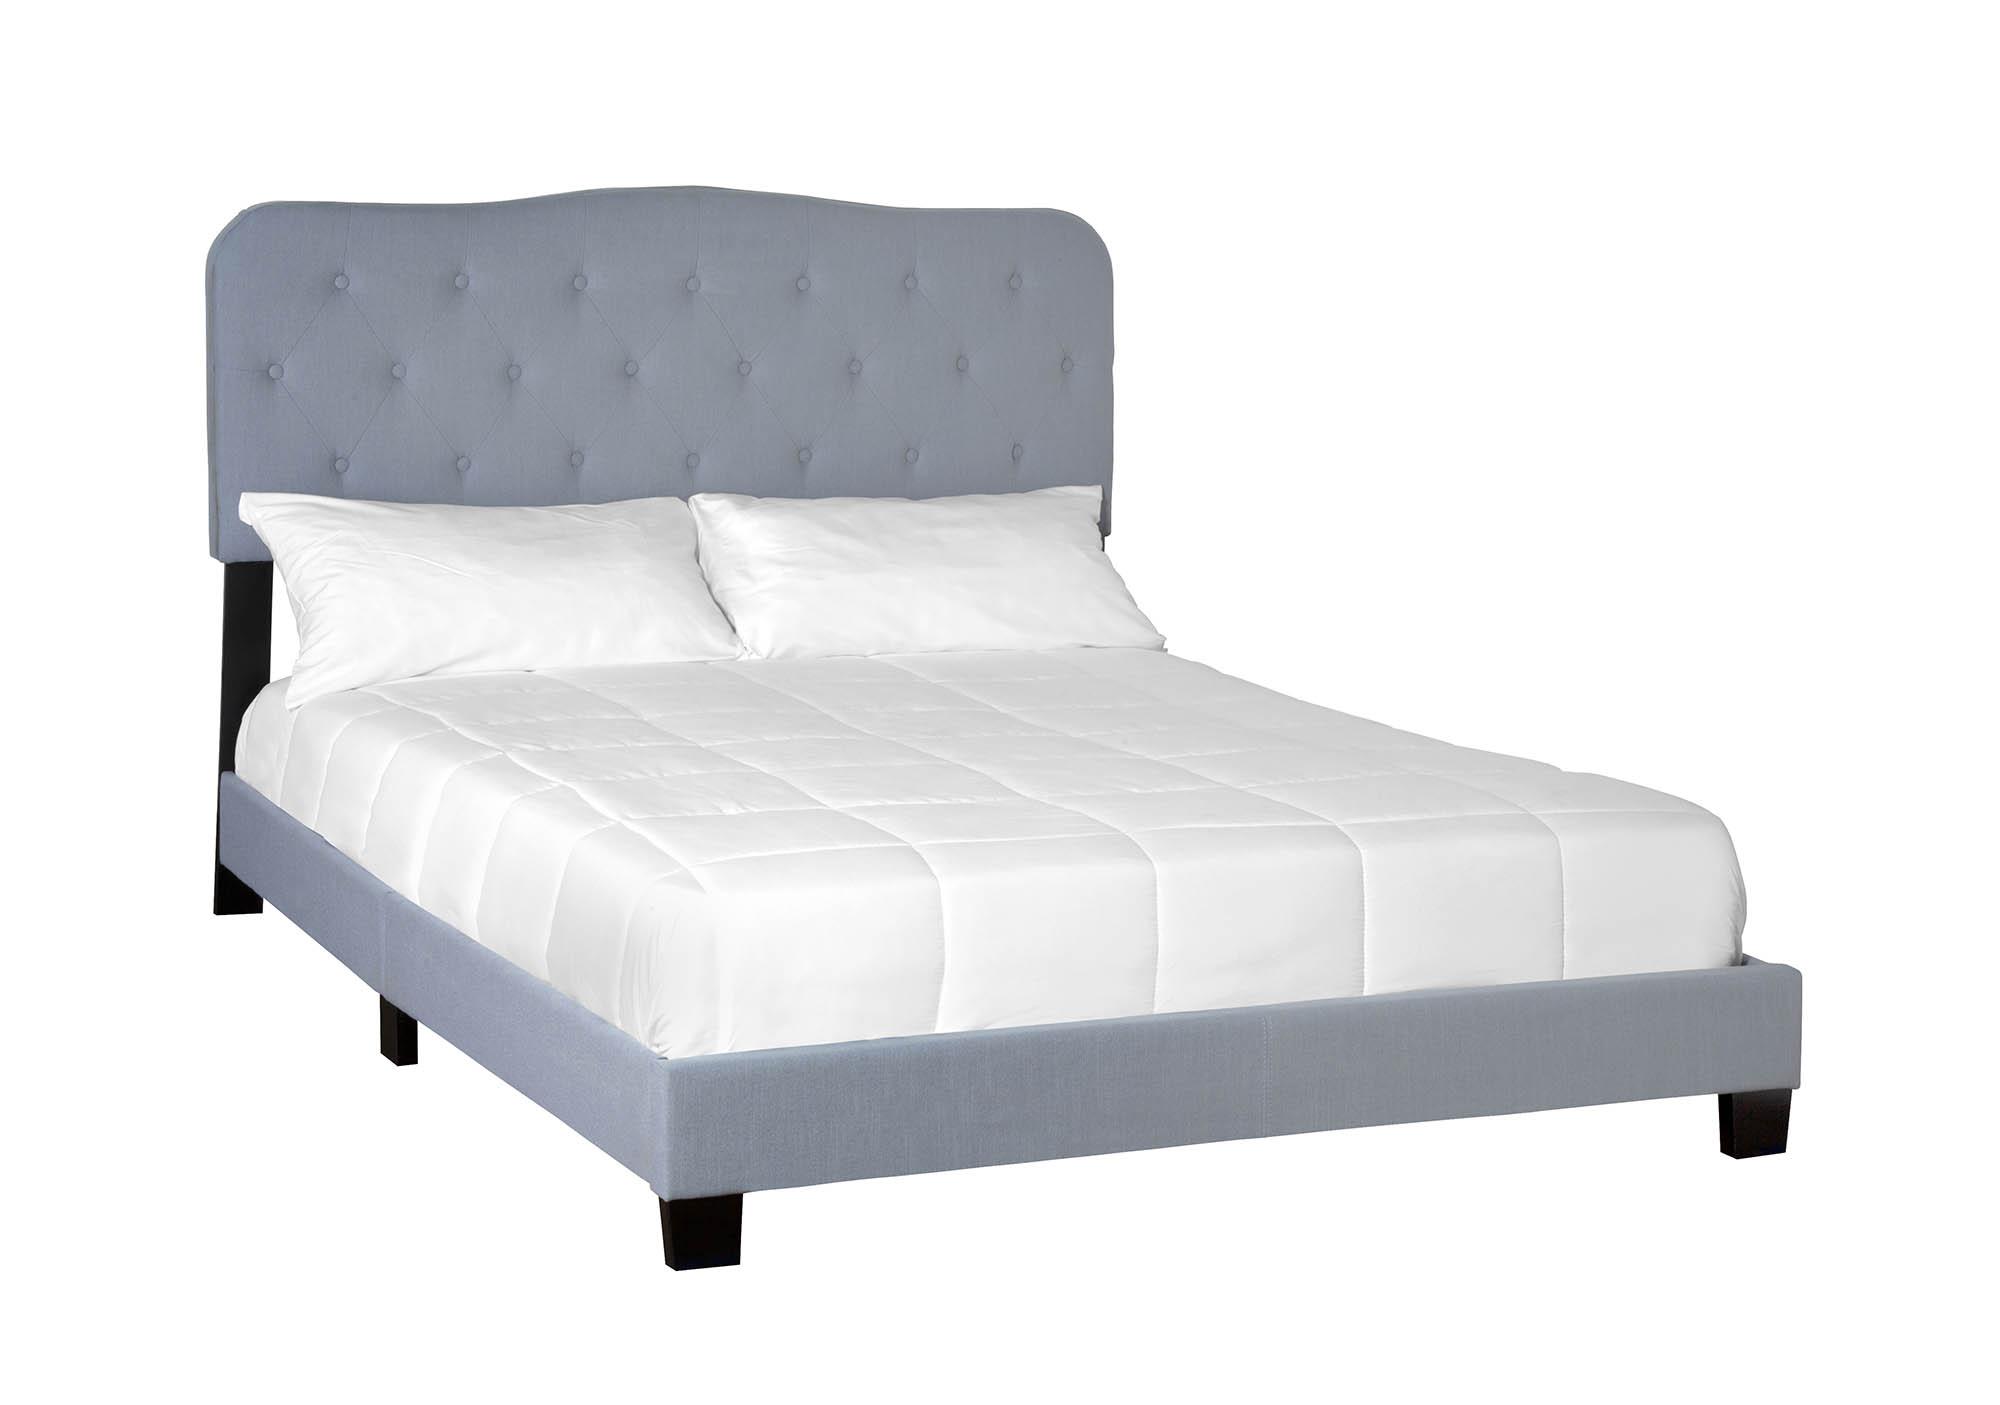 Modern, Transitional Panel Bed ARIANA 1603DS-105 1603DS-105 in Light Blue Fabric